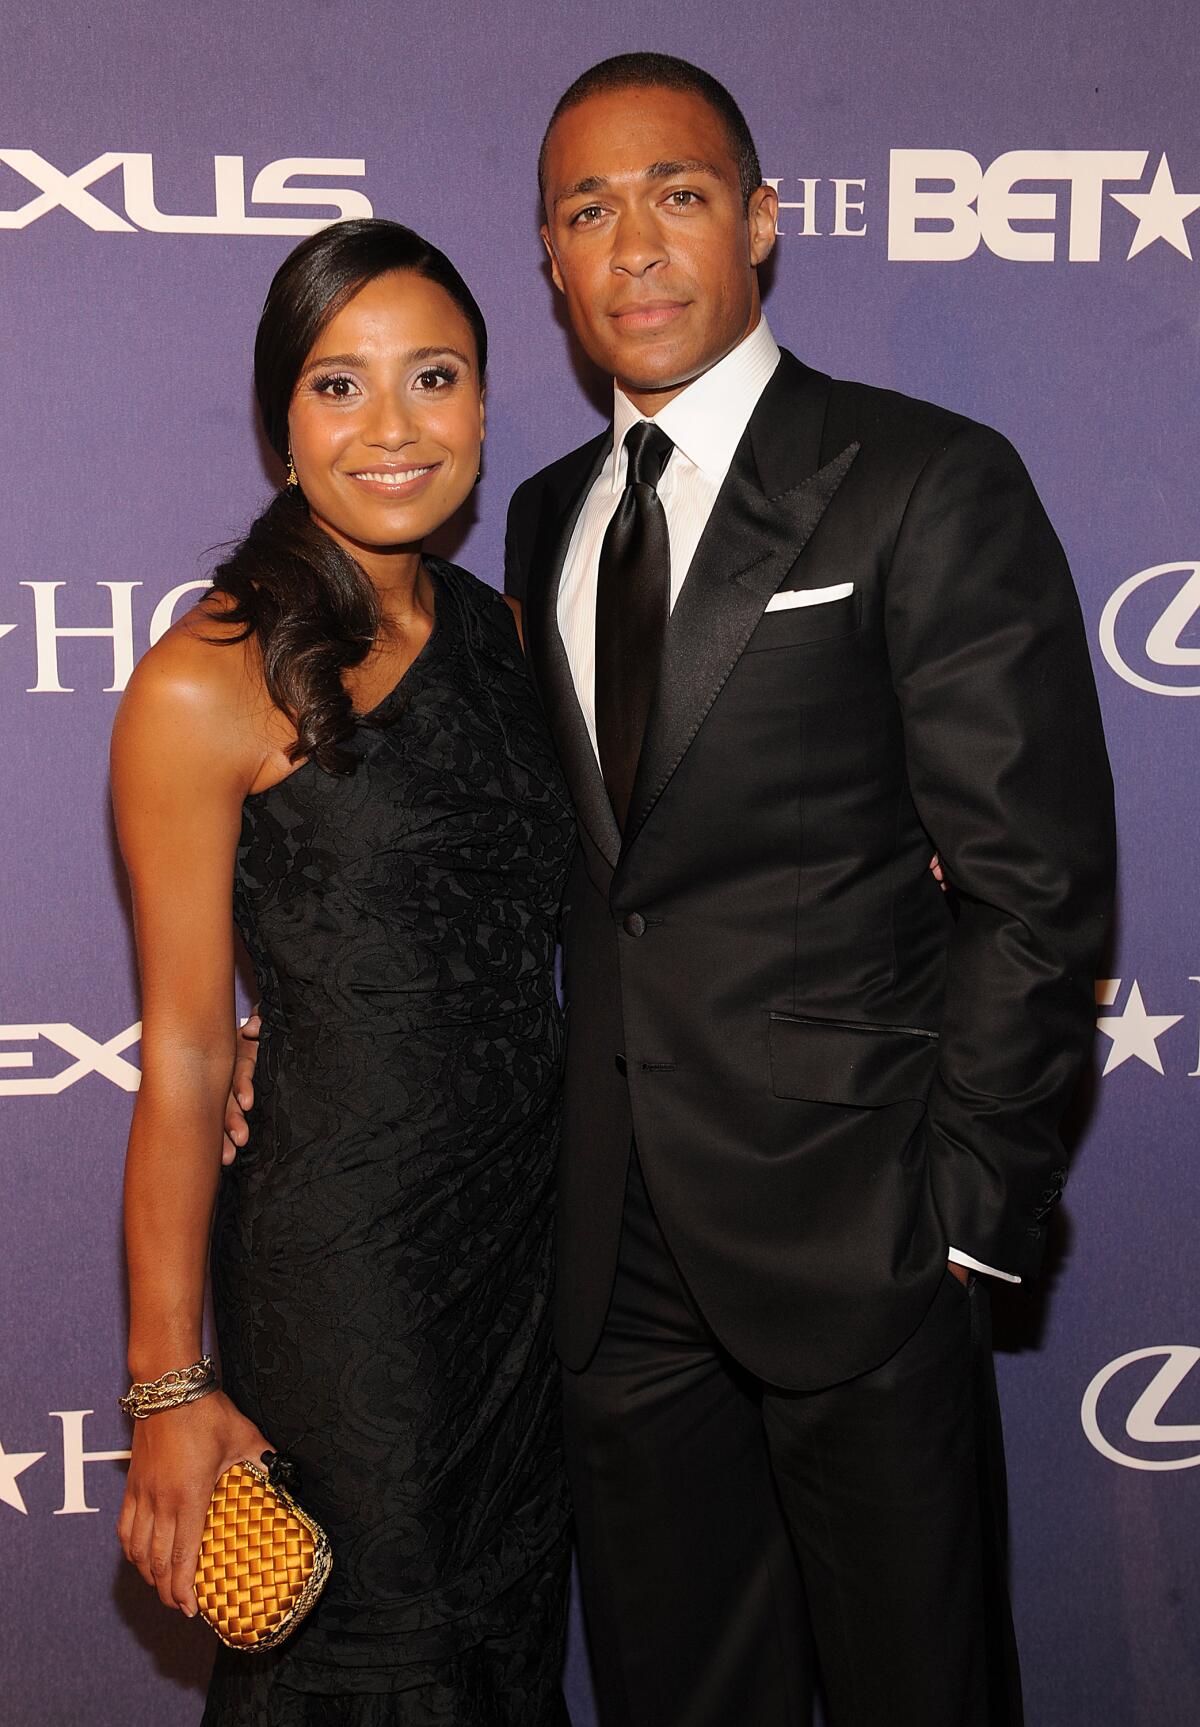 A woman with long black hair wears a black dress and smiles alongside a man with short black hair in a black suit